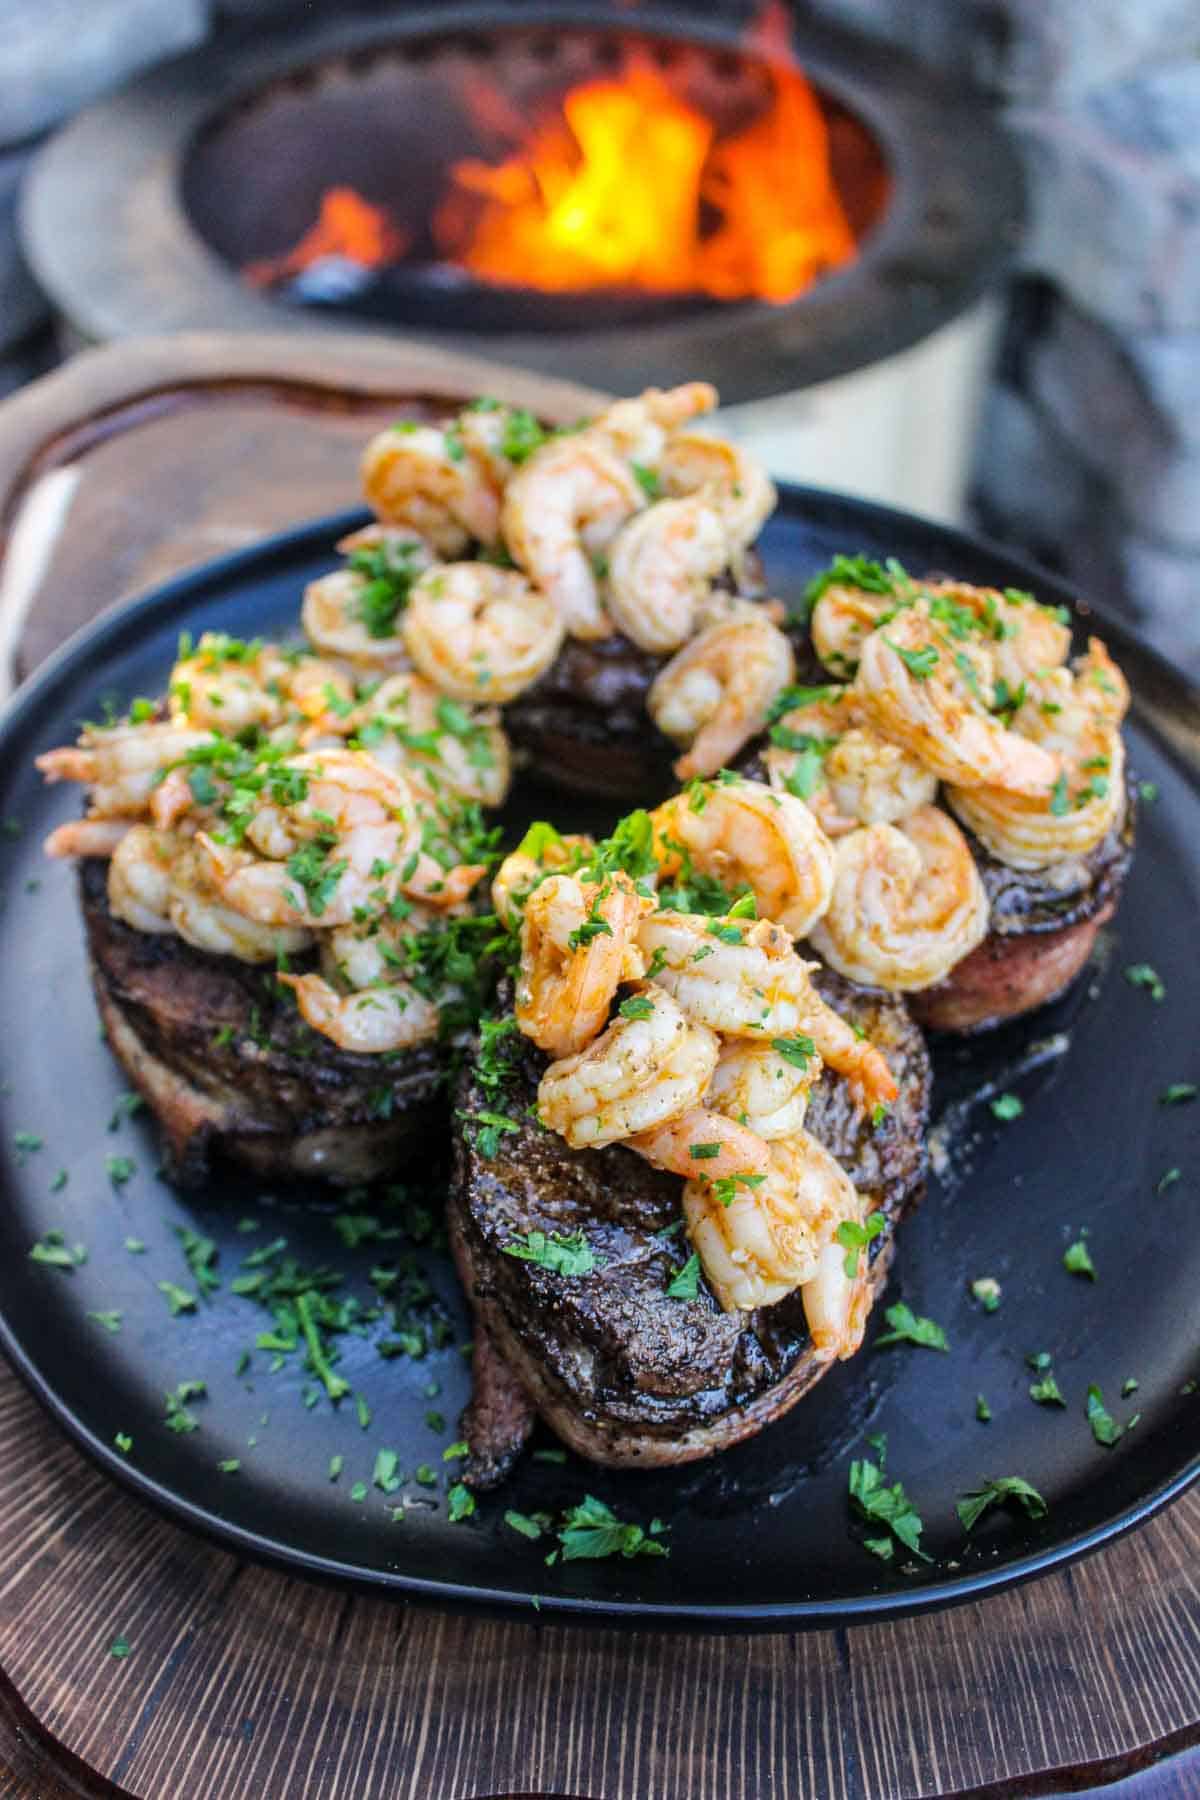 A plated shot of Bacon Wrapped Filet Mignon with Garlic Shrimp.